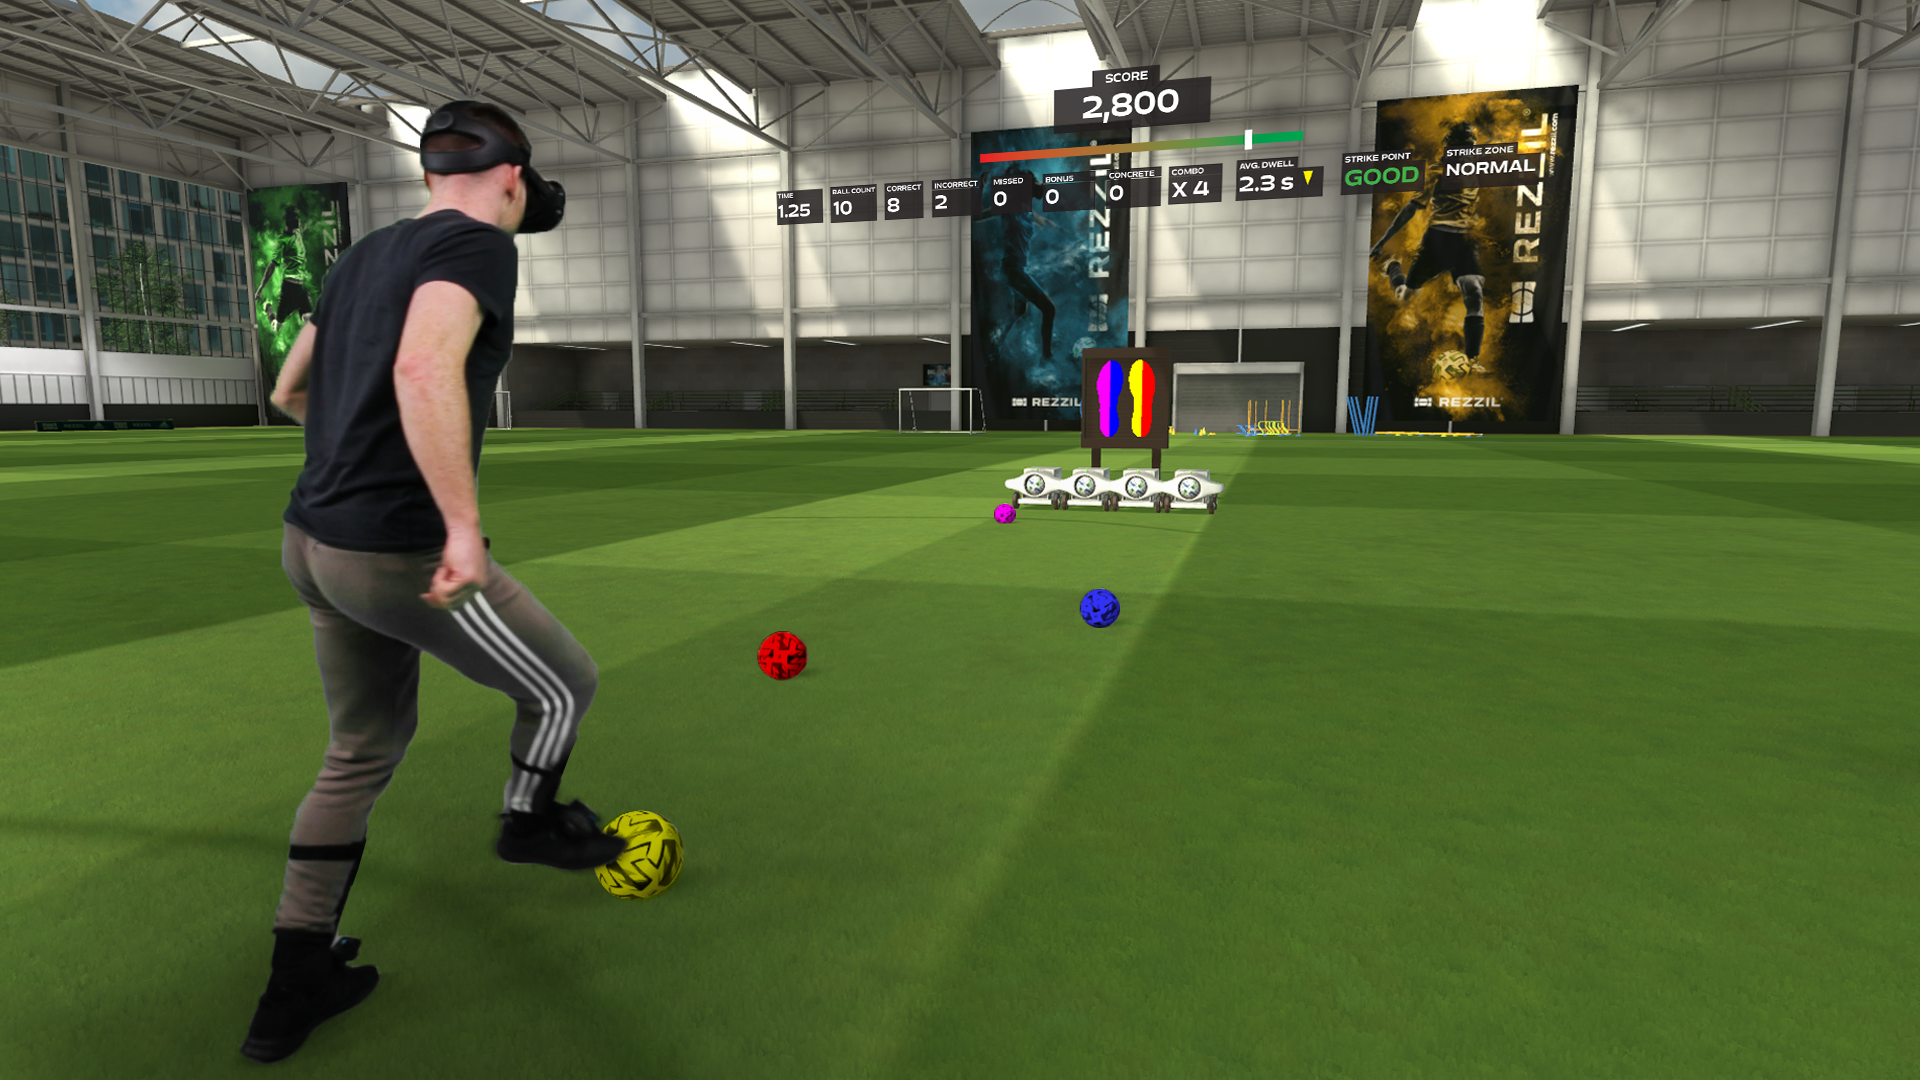 The Worlds Leading VR Soccer Training App Is Now Free On SteamVR